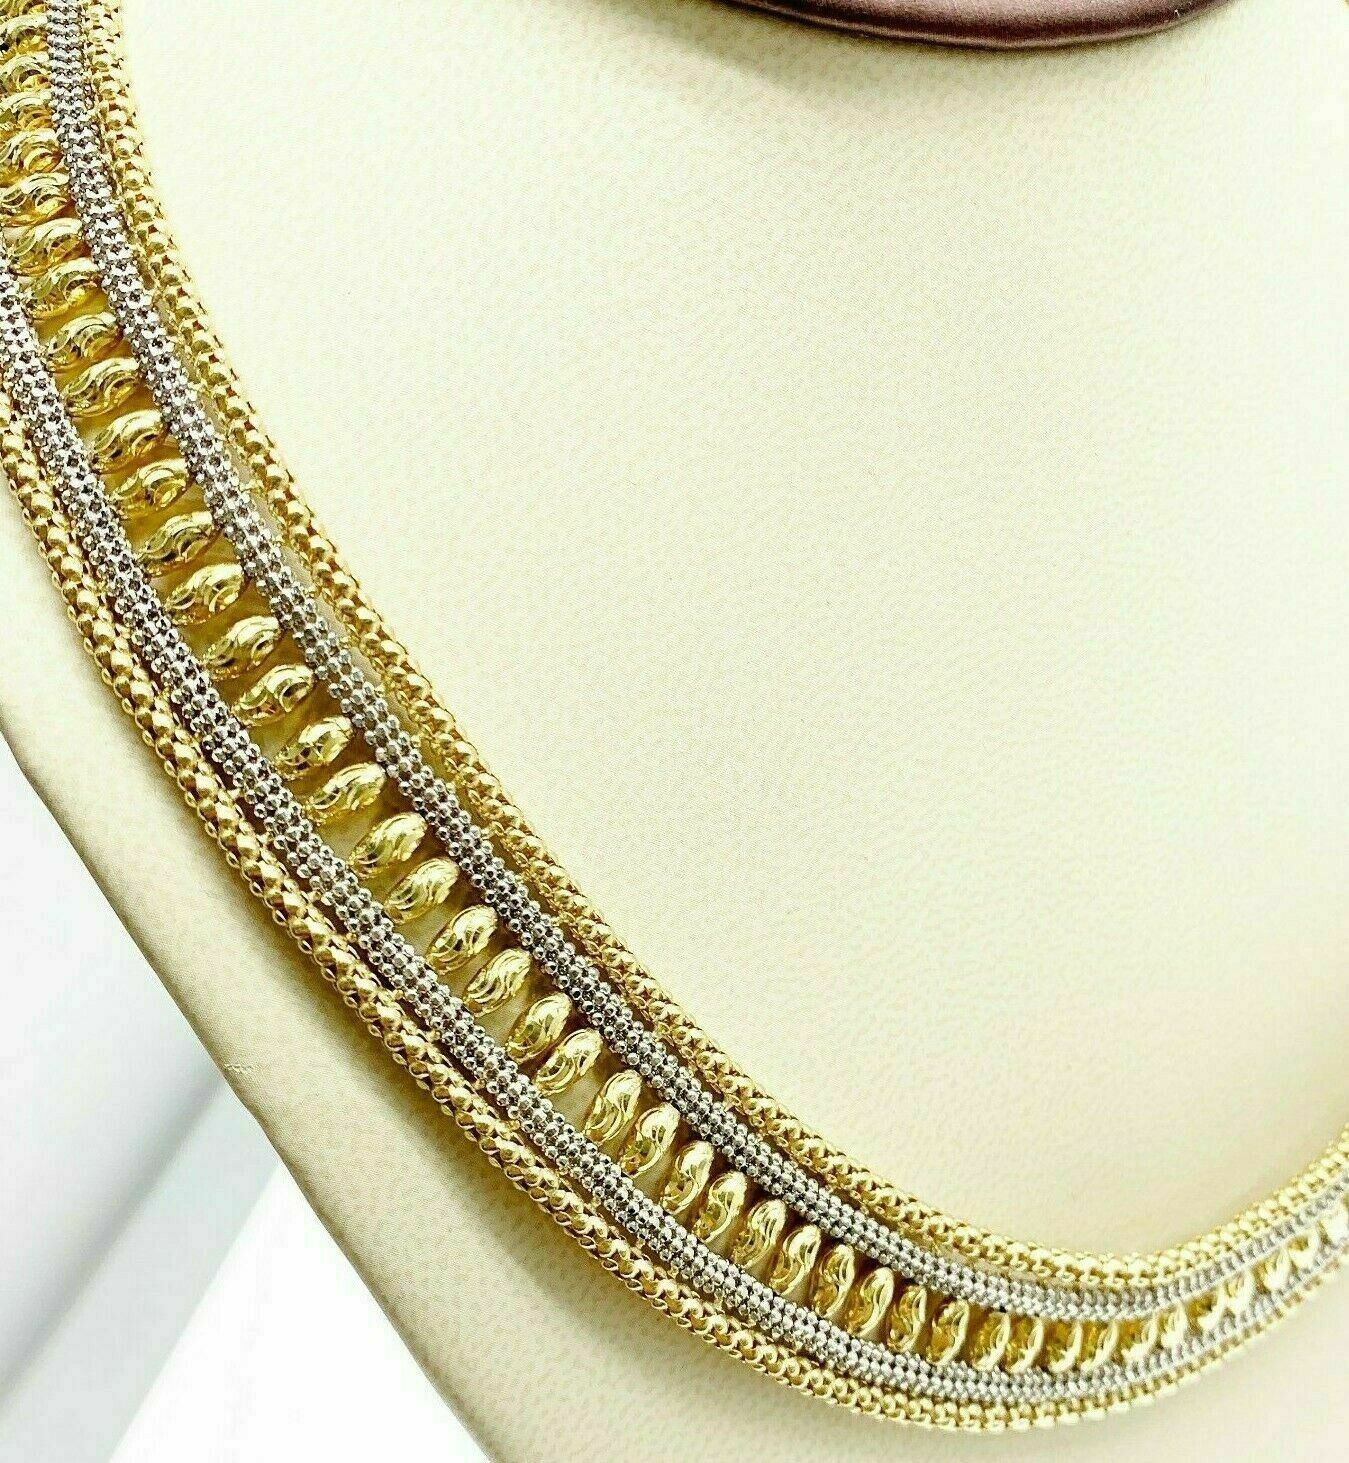 Solid 18K Two Tone Gold Beaded 5 Row Necklace and Bracelet Set 101.7 Grams